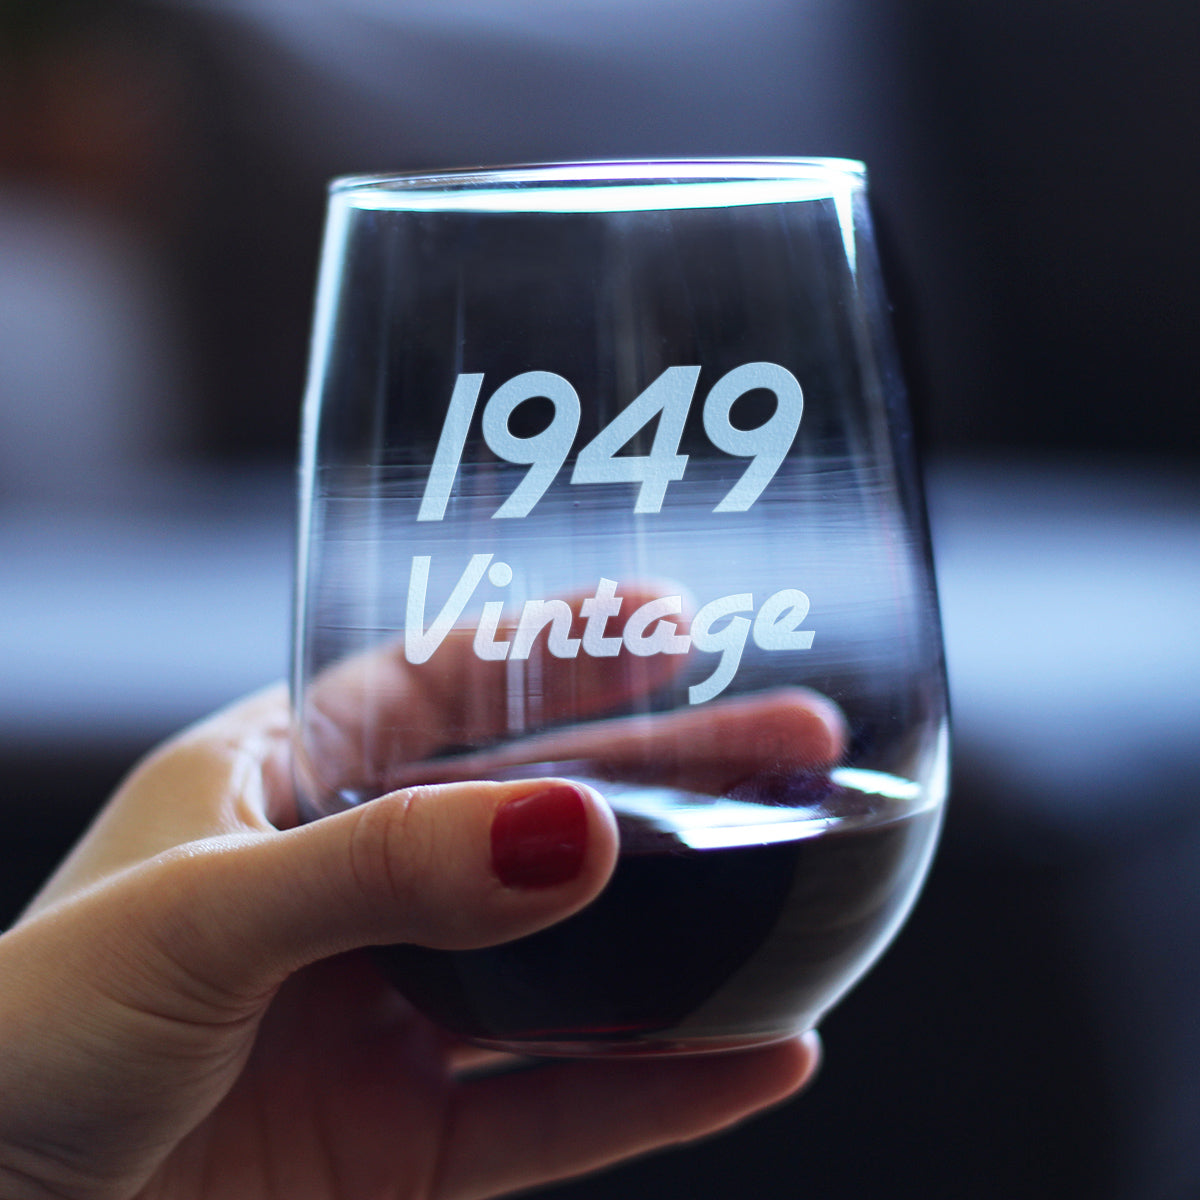 Vintage 1949-74th Birthday Stemless Wine Glass Gifts for Women &amp; Men Turning 74 - Bday Party Decor - Large Glasses